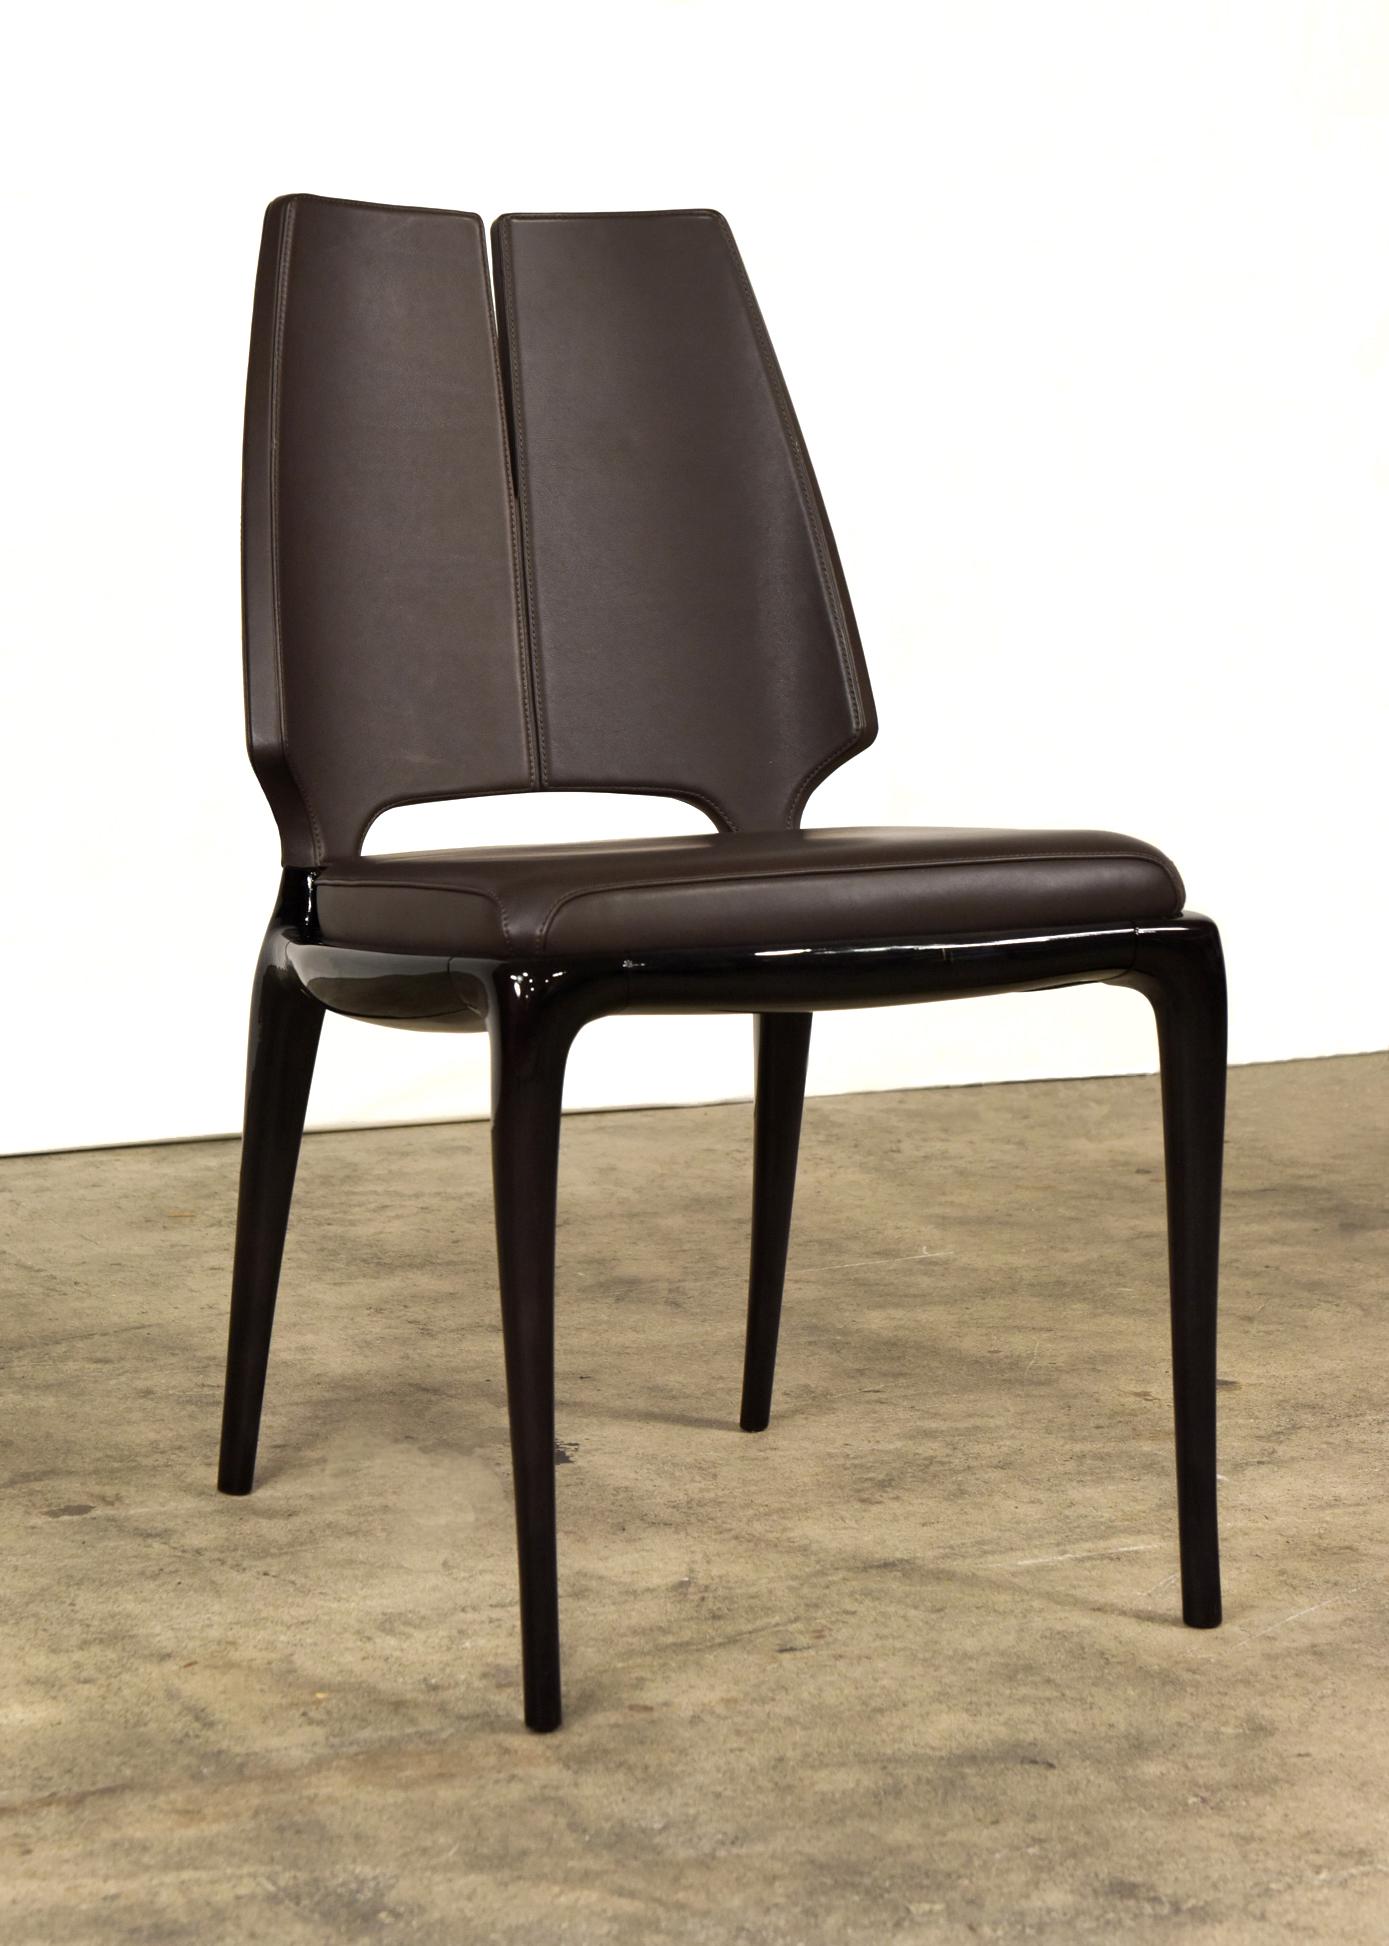 Slender and refined, the Contour chair with armrests brilliantly brings together a sober spirit with
contemporary taste. Made with dark-lacquered wood, it houses the lava coloured leather seat
cushion, which matches the seatback upholstery.